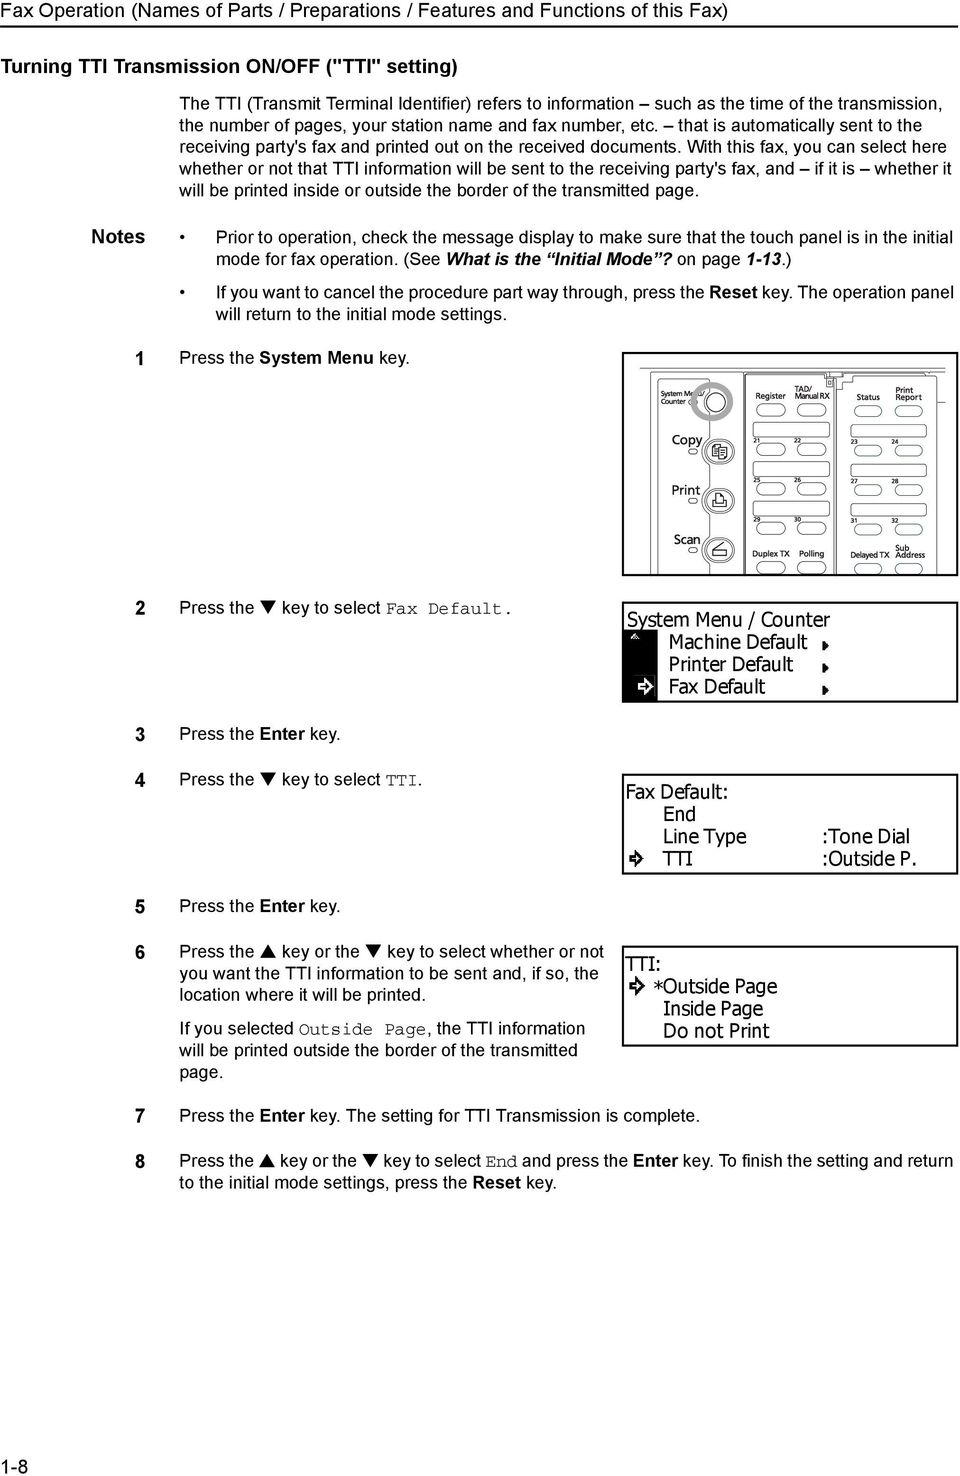 With this fax, you can select here whether or not that TTI information will be sent to the receiving party's fax, and if it is whether it will be printed inside or outside the border of the